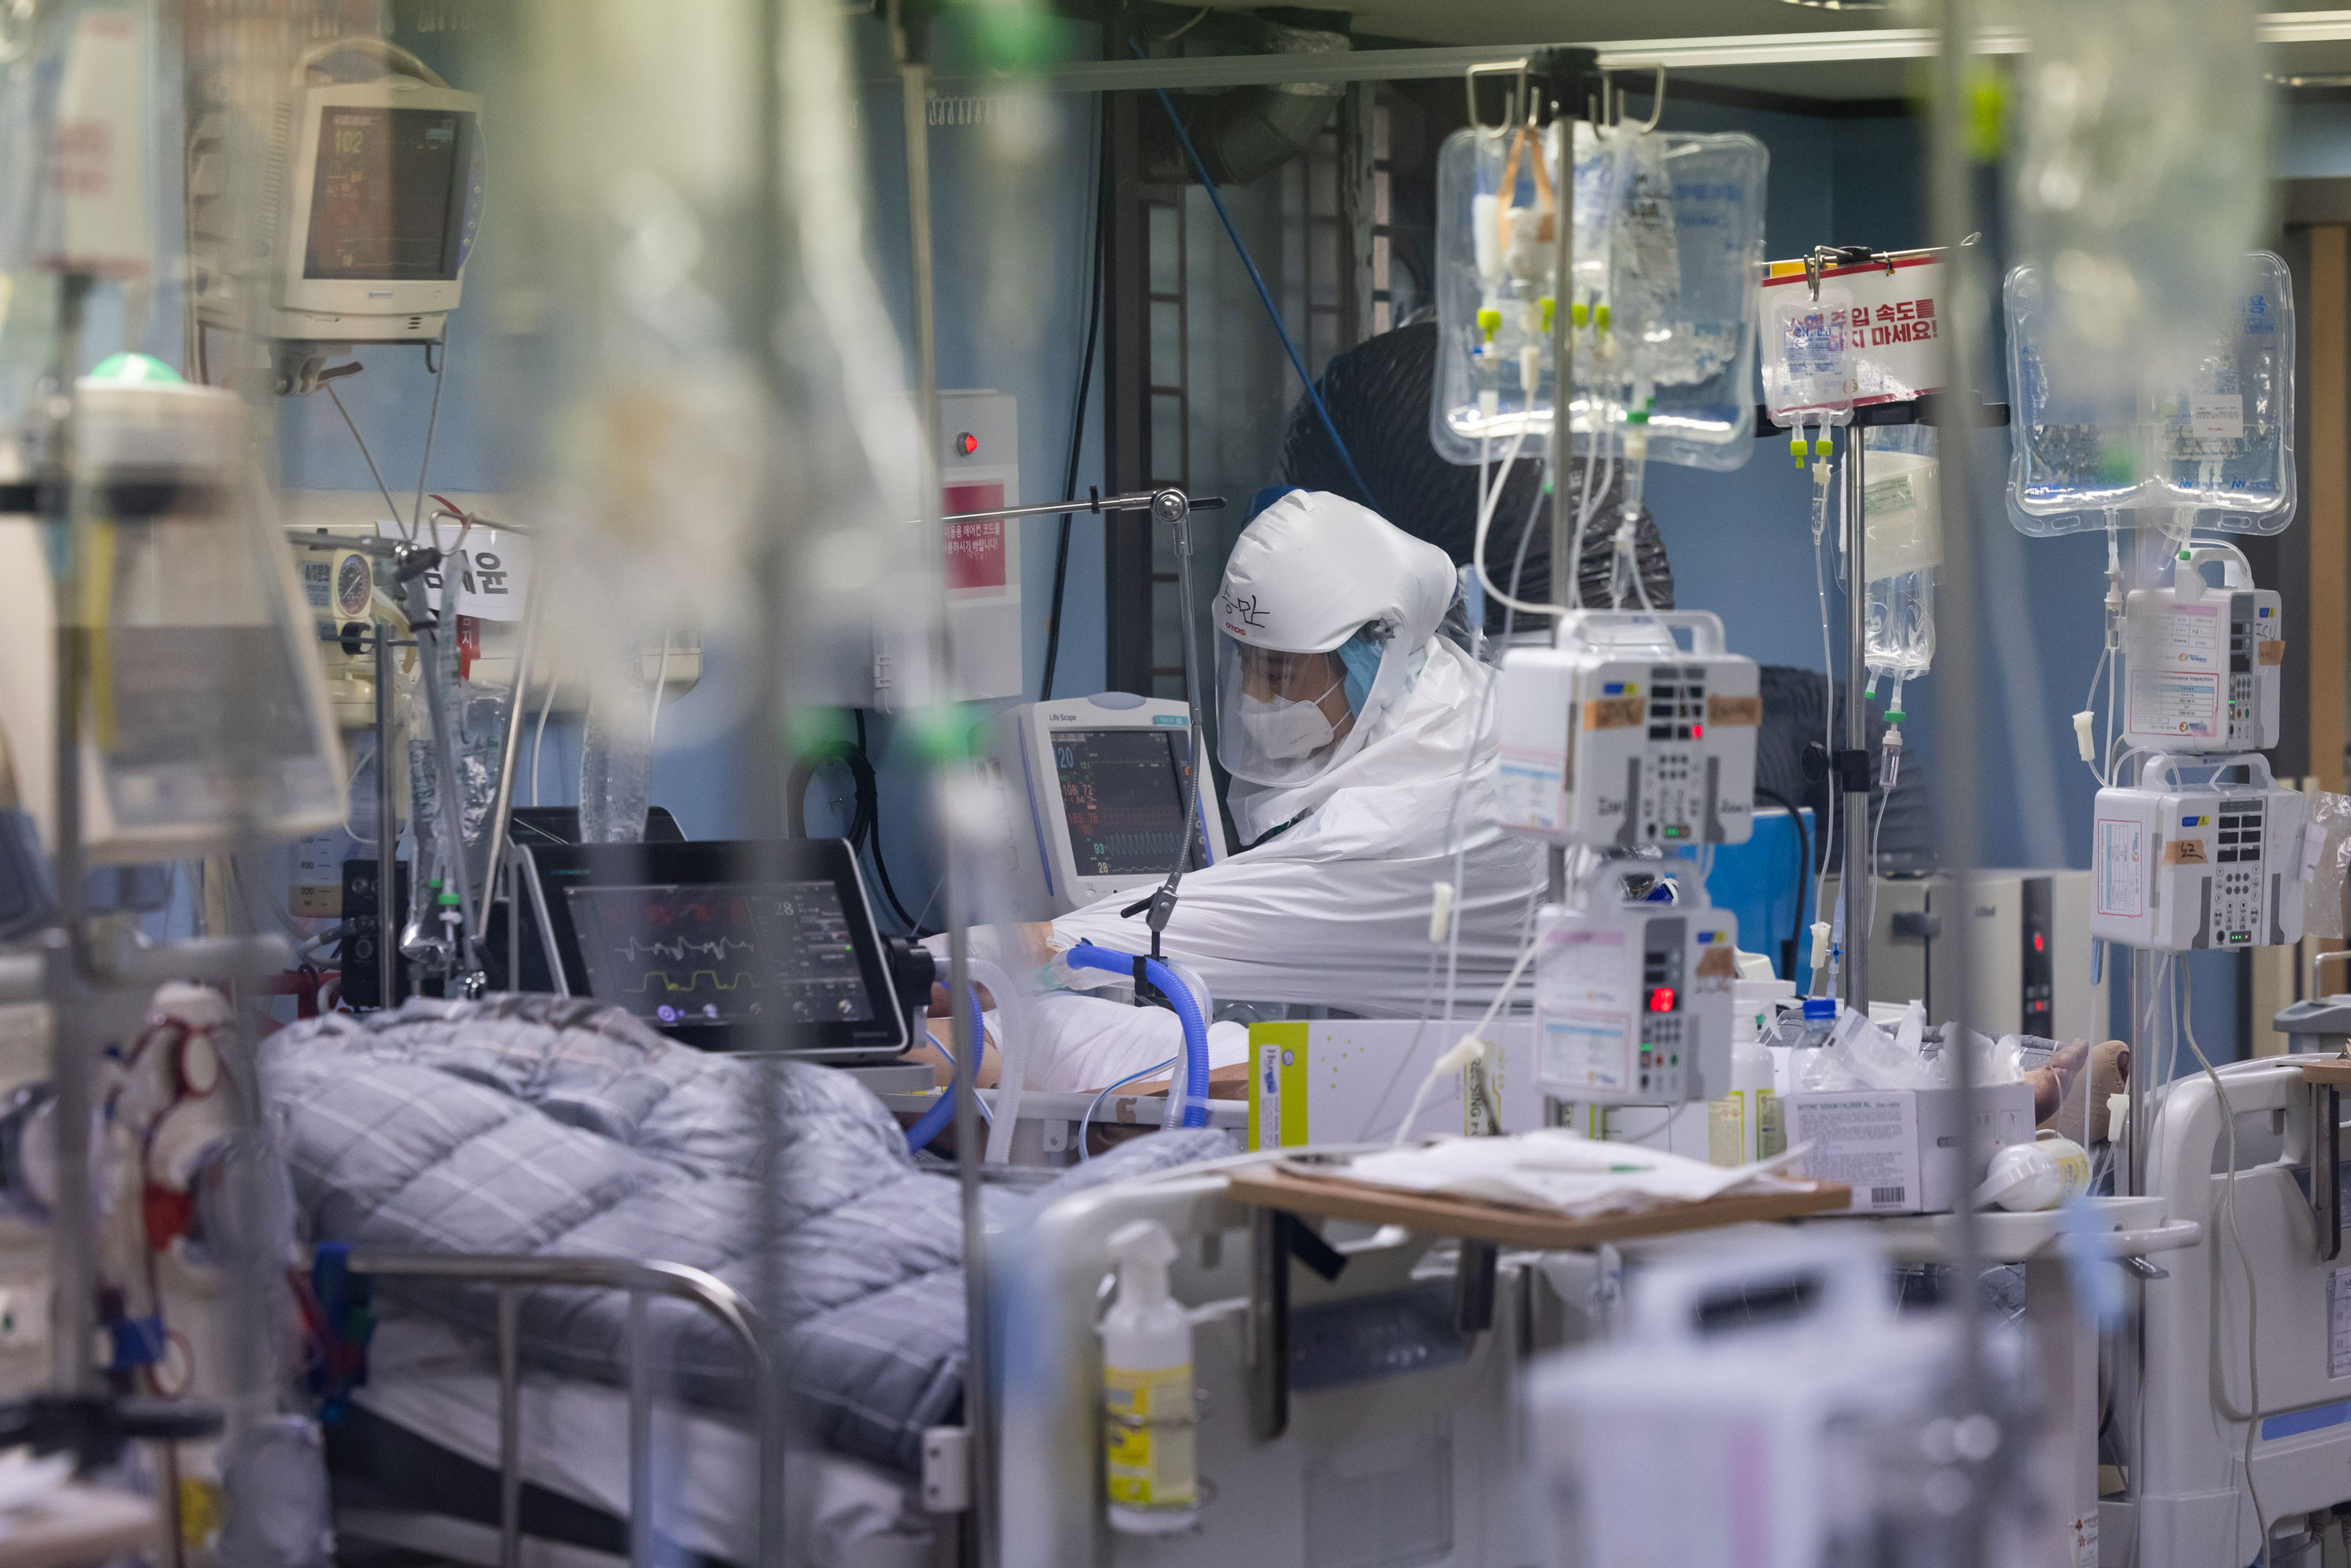 A health worker attends to a Covid-19 patient at an intensive care unit at Pyeongtaek Bagae Hospital in Pyeongtaek, Gyeonggi Province, South Korea, on December 16.